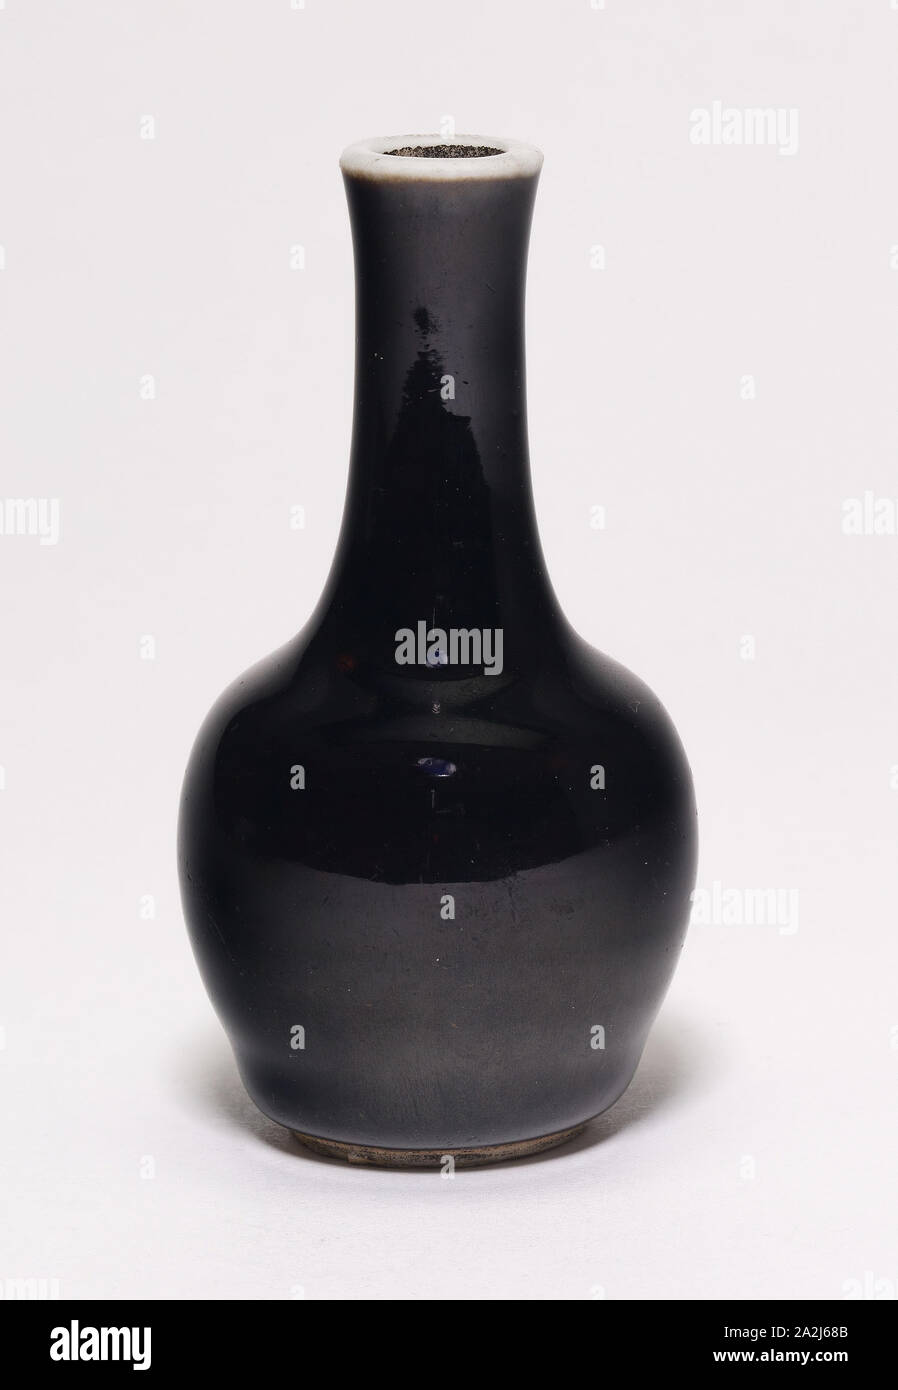 Miniature Bottle-Shaped Vase, Qing dynasty (1644–1911) or later, China, Porcelain with mirror black glaze, H. 7.9 cm (3 1/8 in.), diam. 4.1 cm (1 5/8 in Stock Photo